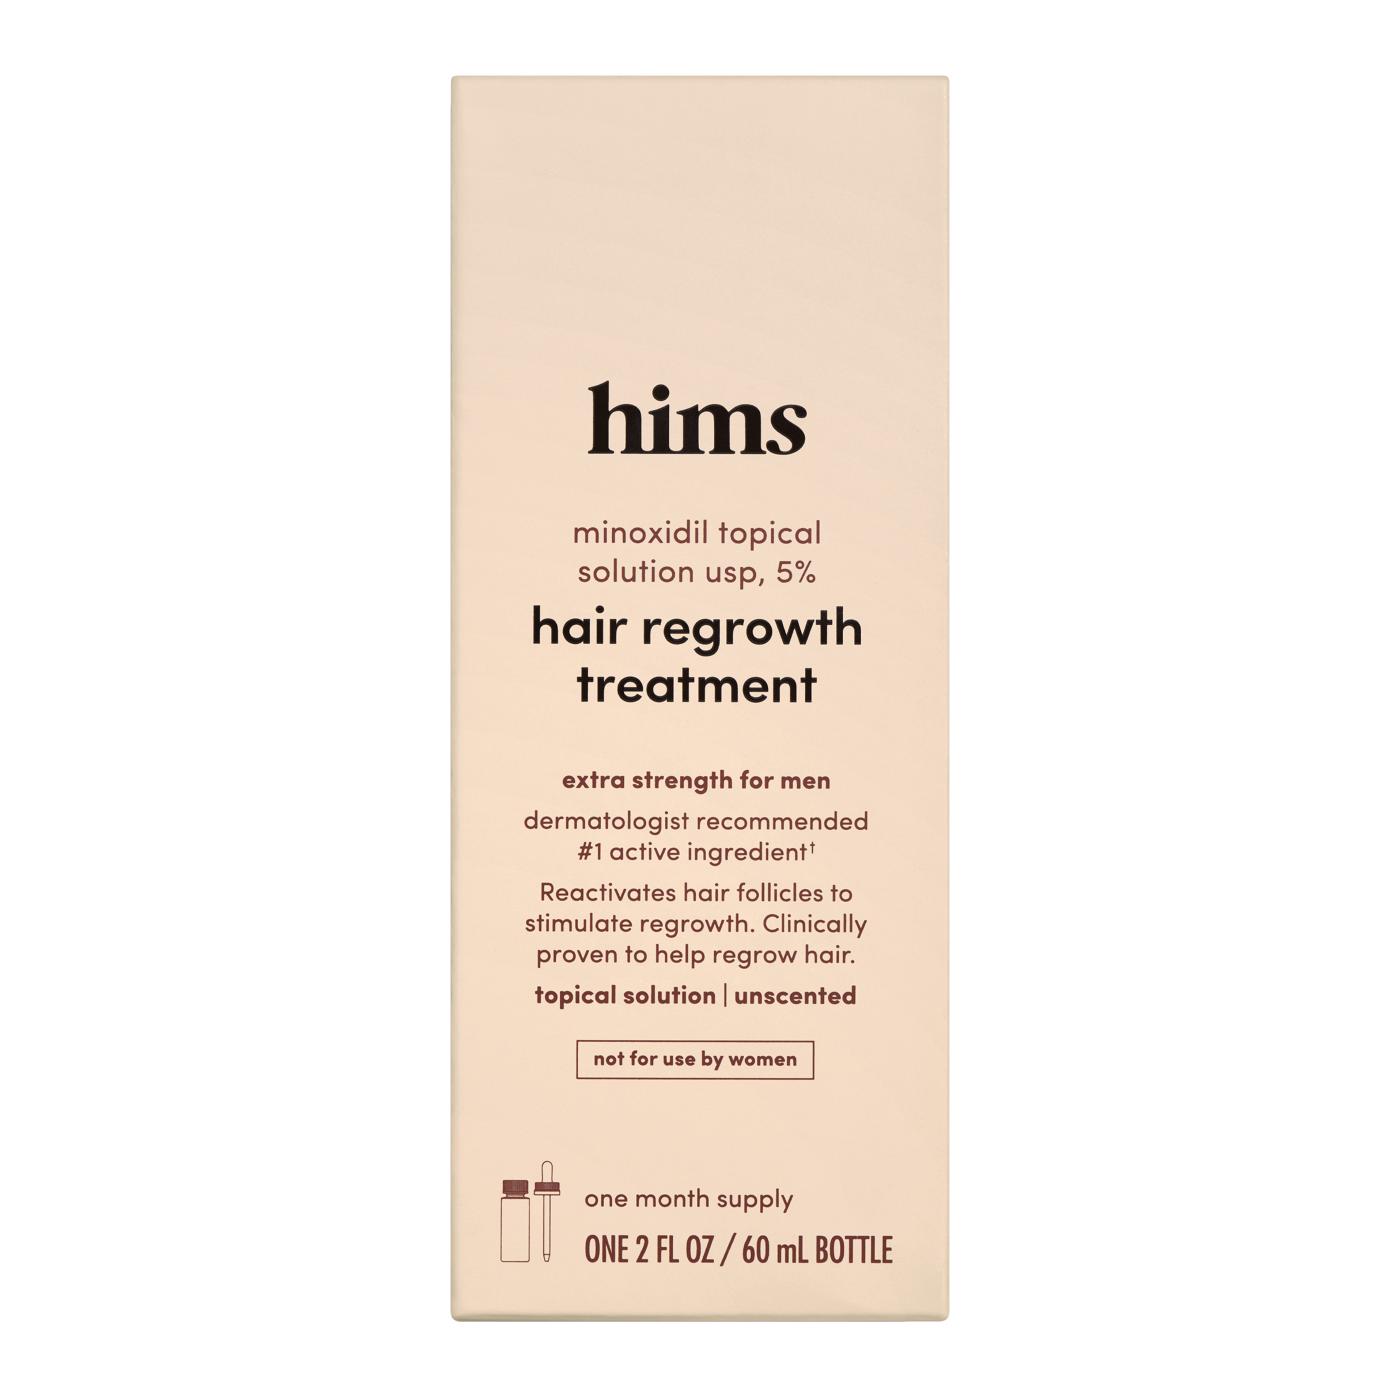 Hims Minoxidil Topical Hair Regrowth Treatment; image 1 of 2